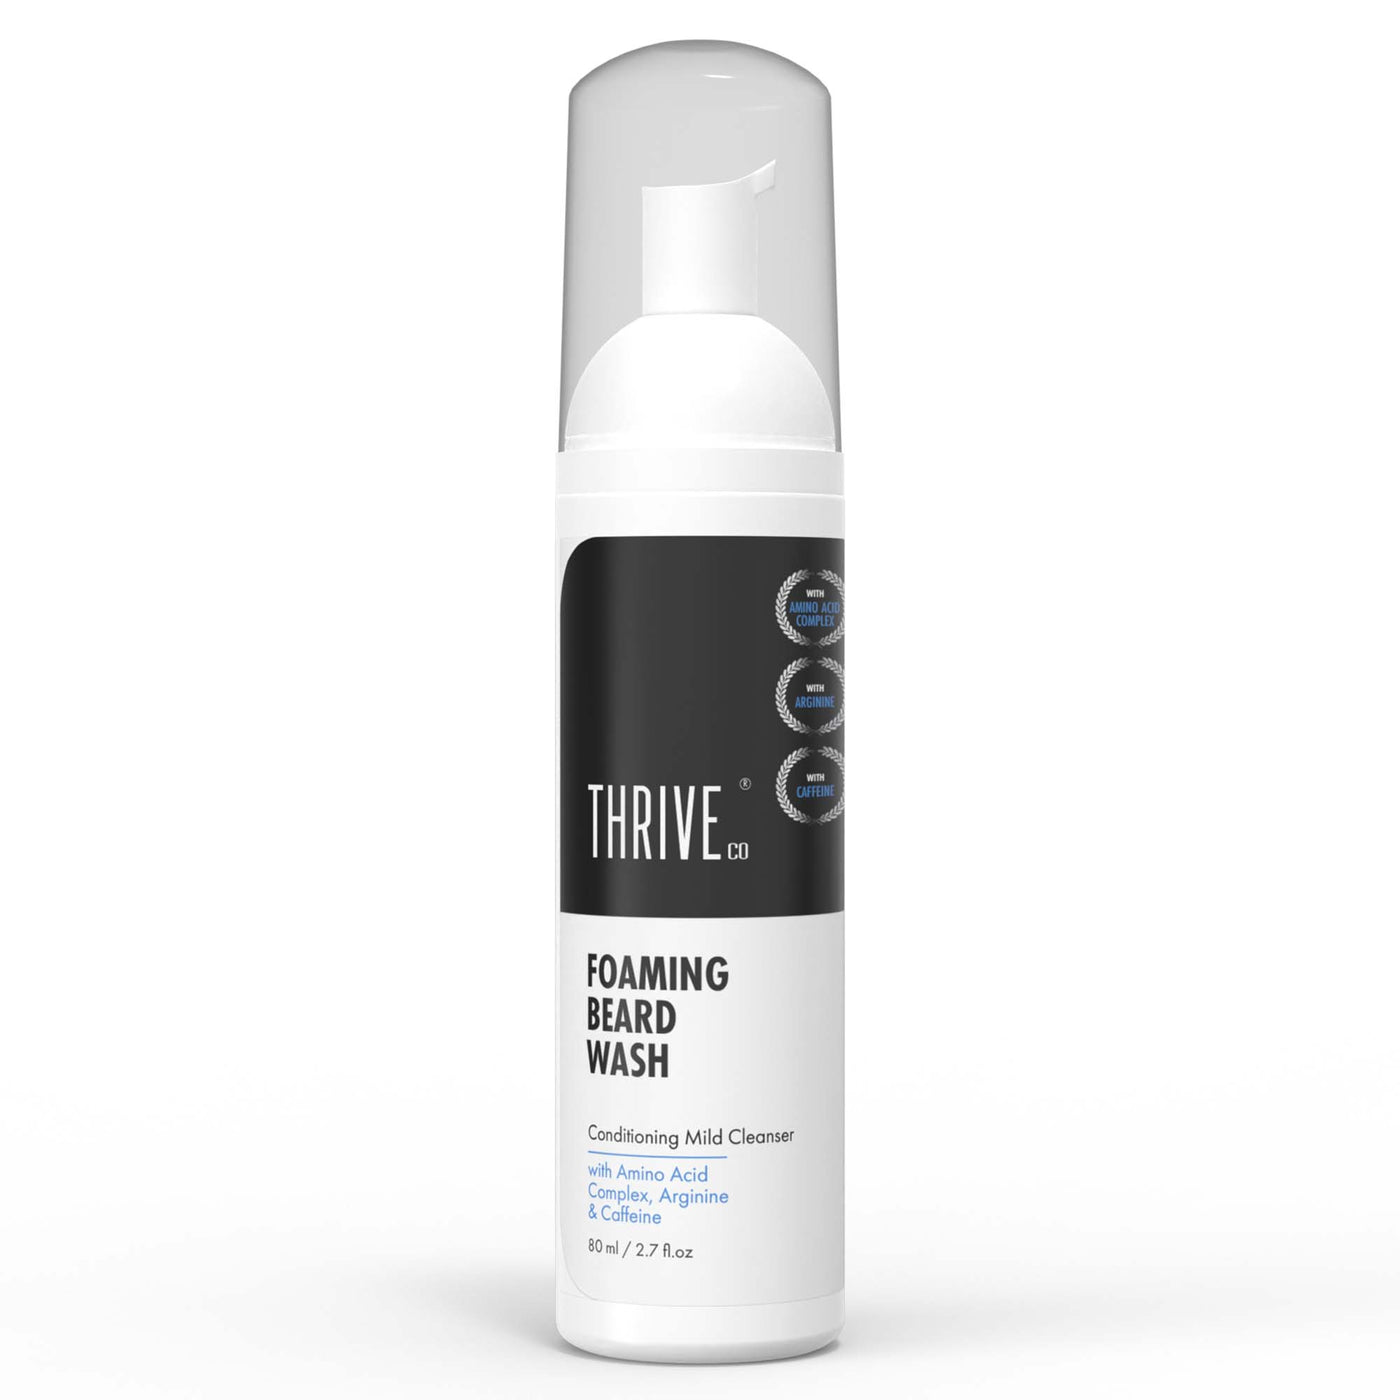 ThriveCo Foaming Beard Wash To Reduce Shedding, Thorough Cleansing, Increase Strength and Softness - 80 ML